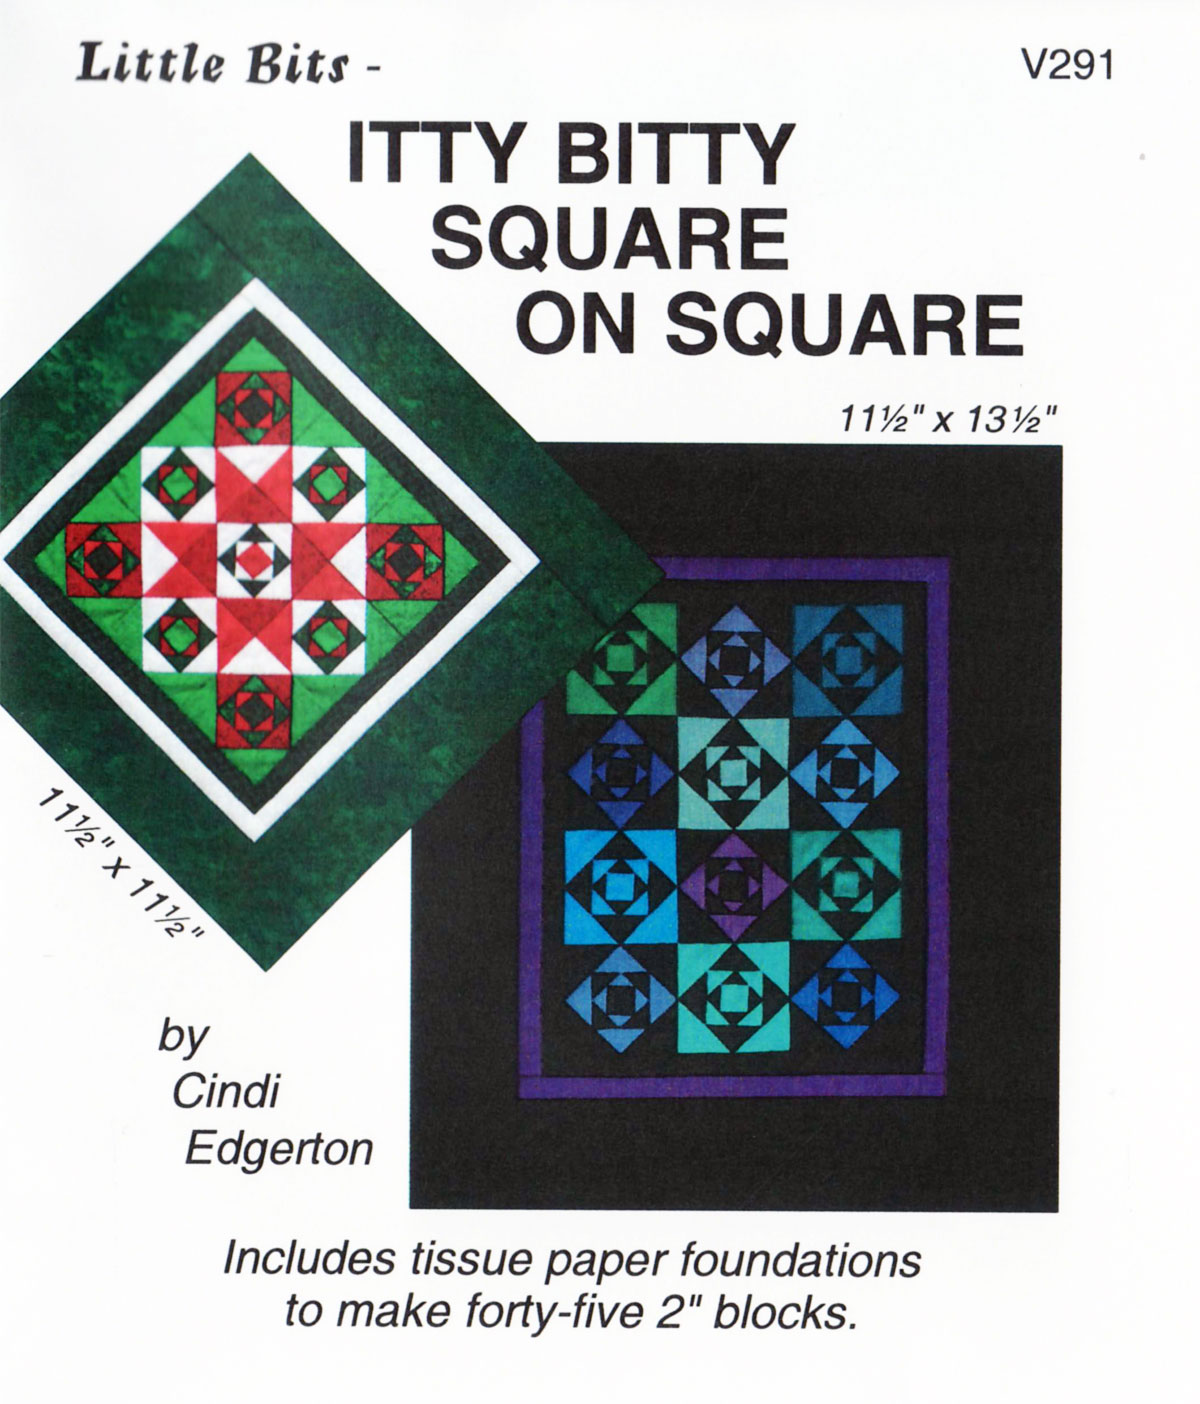 Itty-Bitty-Square-on-Square-quilt-sewing-pattern-Cindi-Edgerton-front